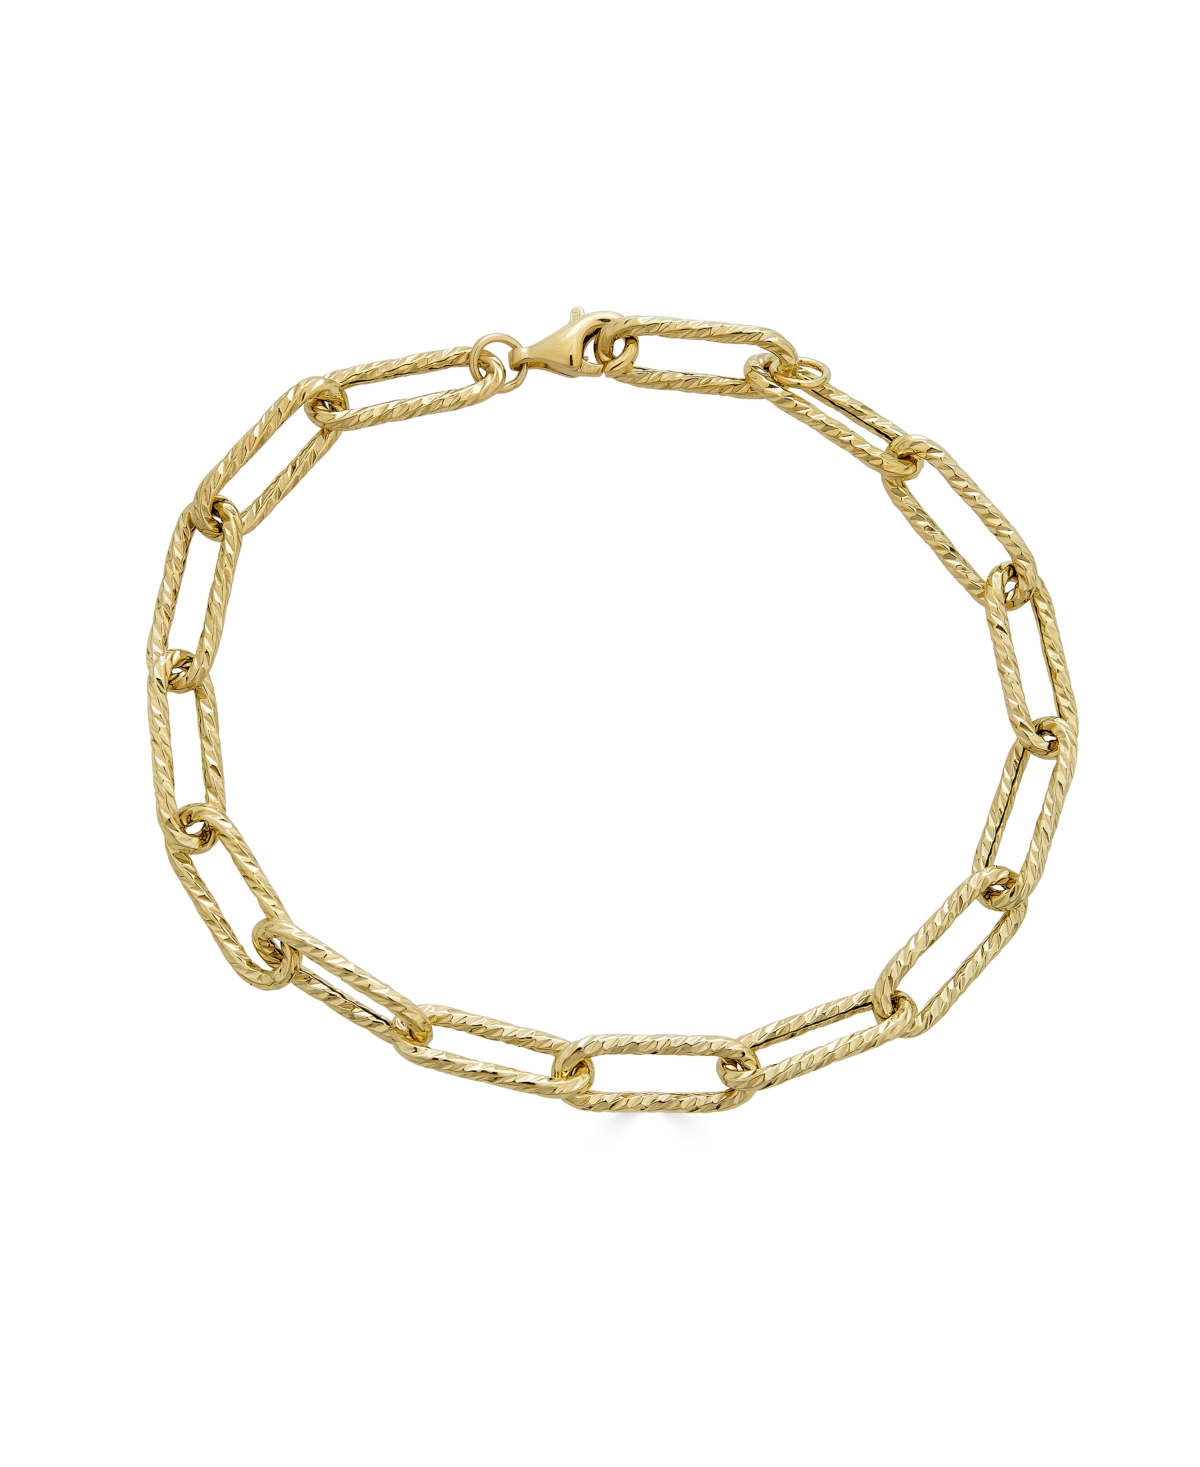 Textured Paperclip Link Chain Bracelet in 10k Gold - Yellow Gold